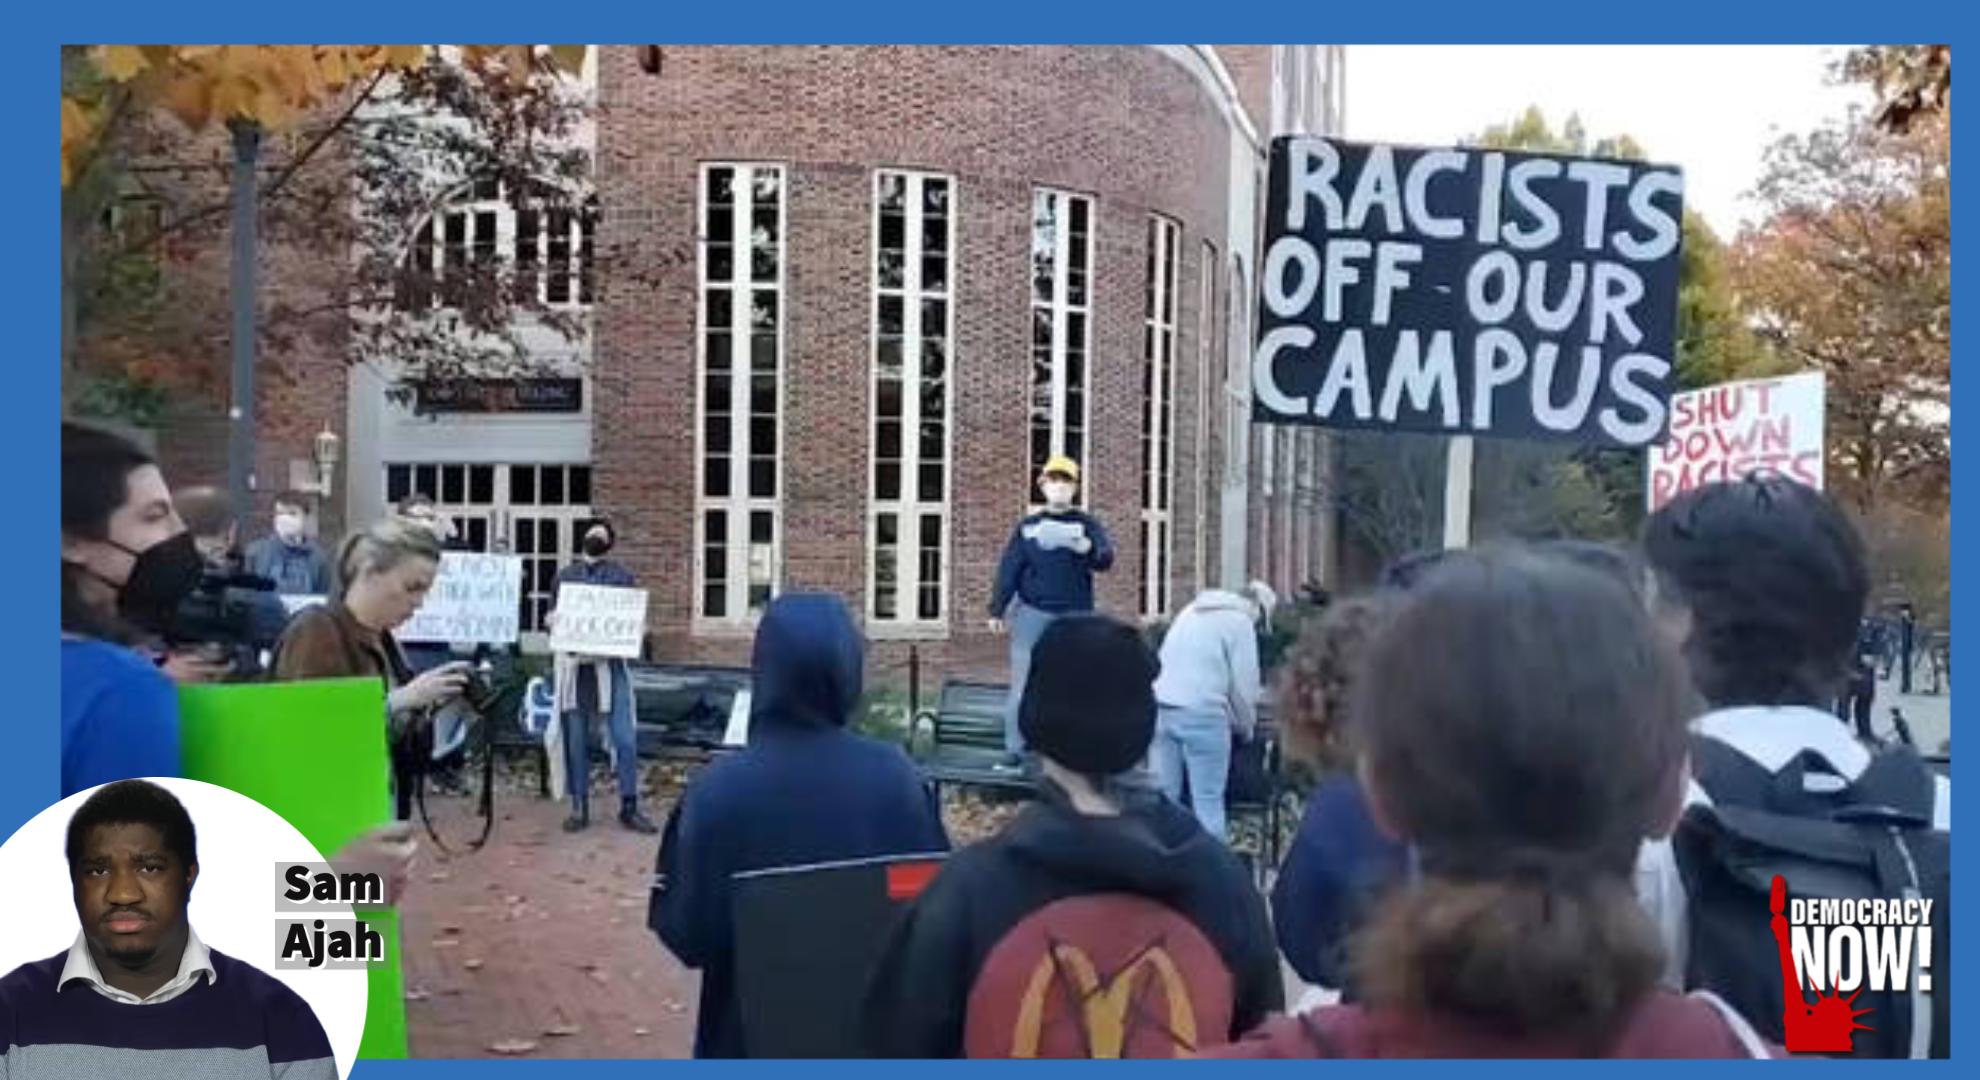 "Fascism Has No Place Here”: Penn State Students Maced While Protesting Violent Proud Boys Event